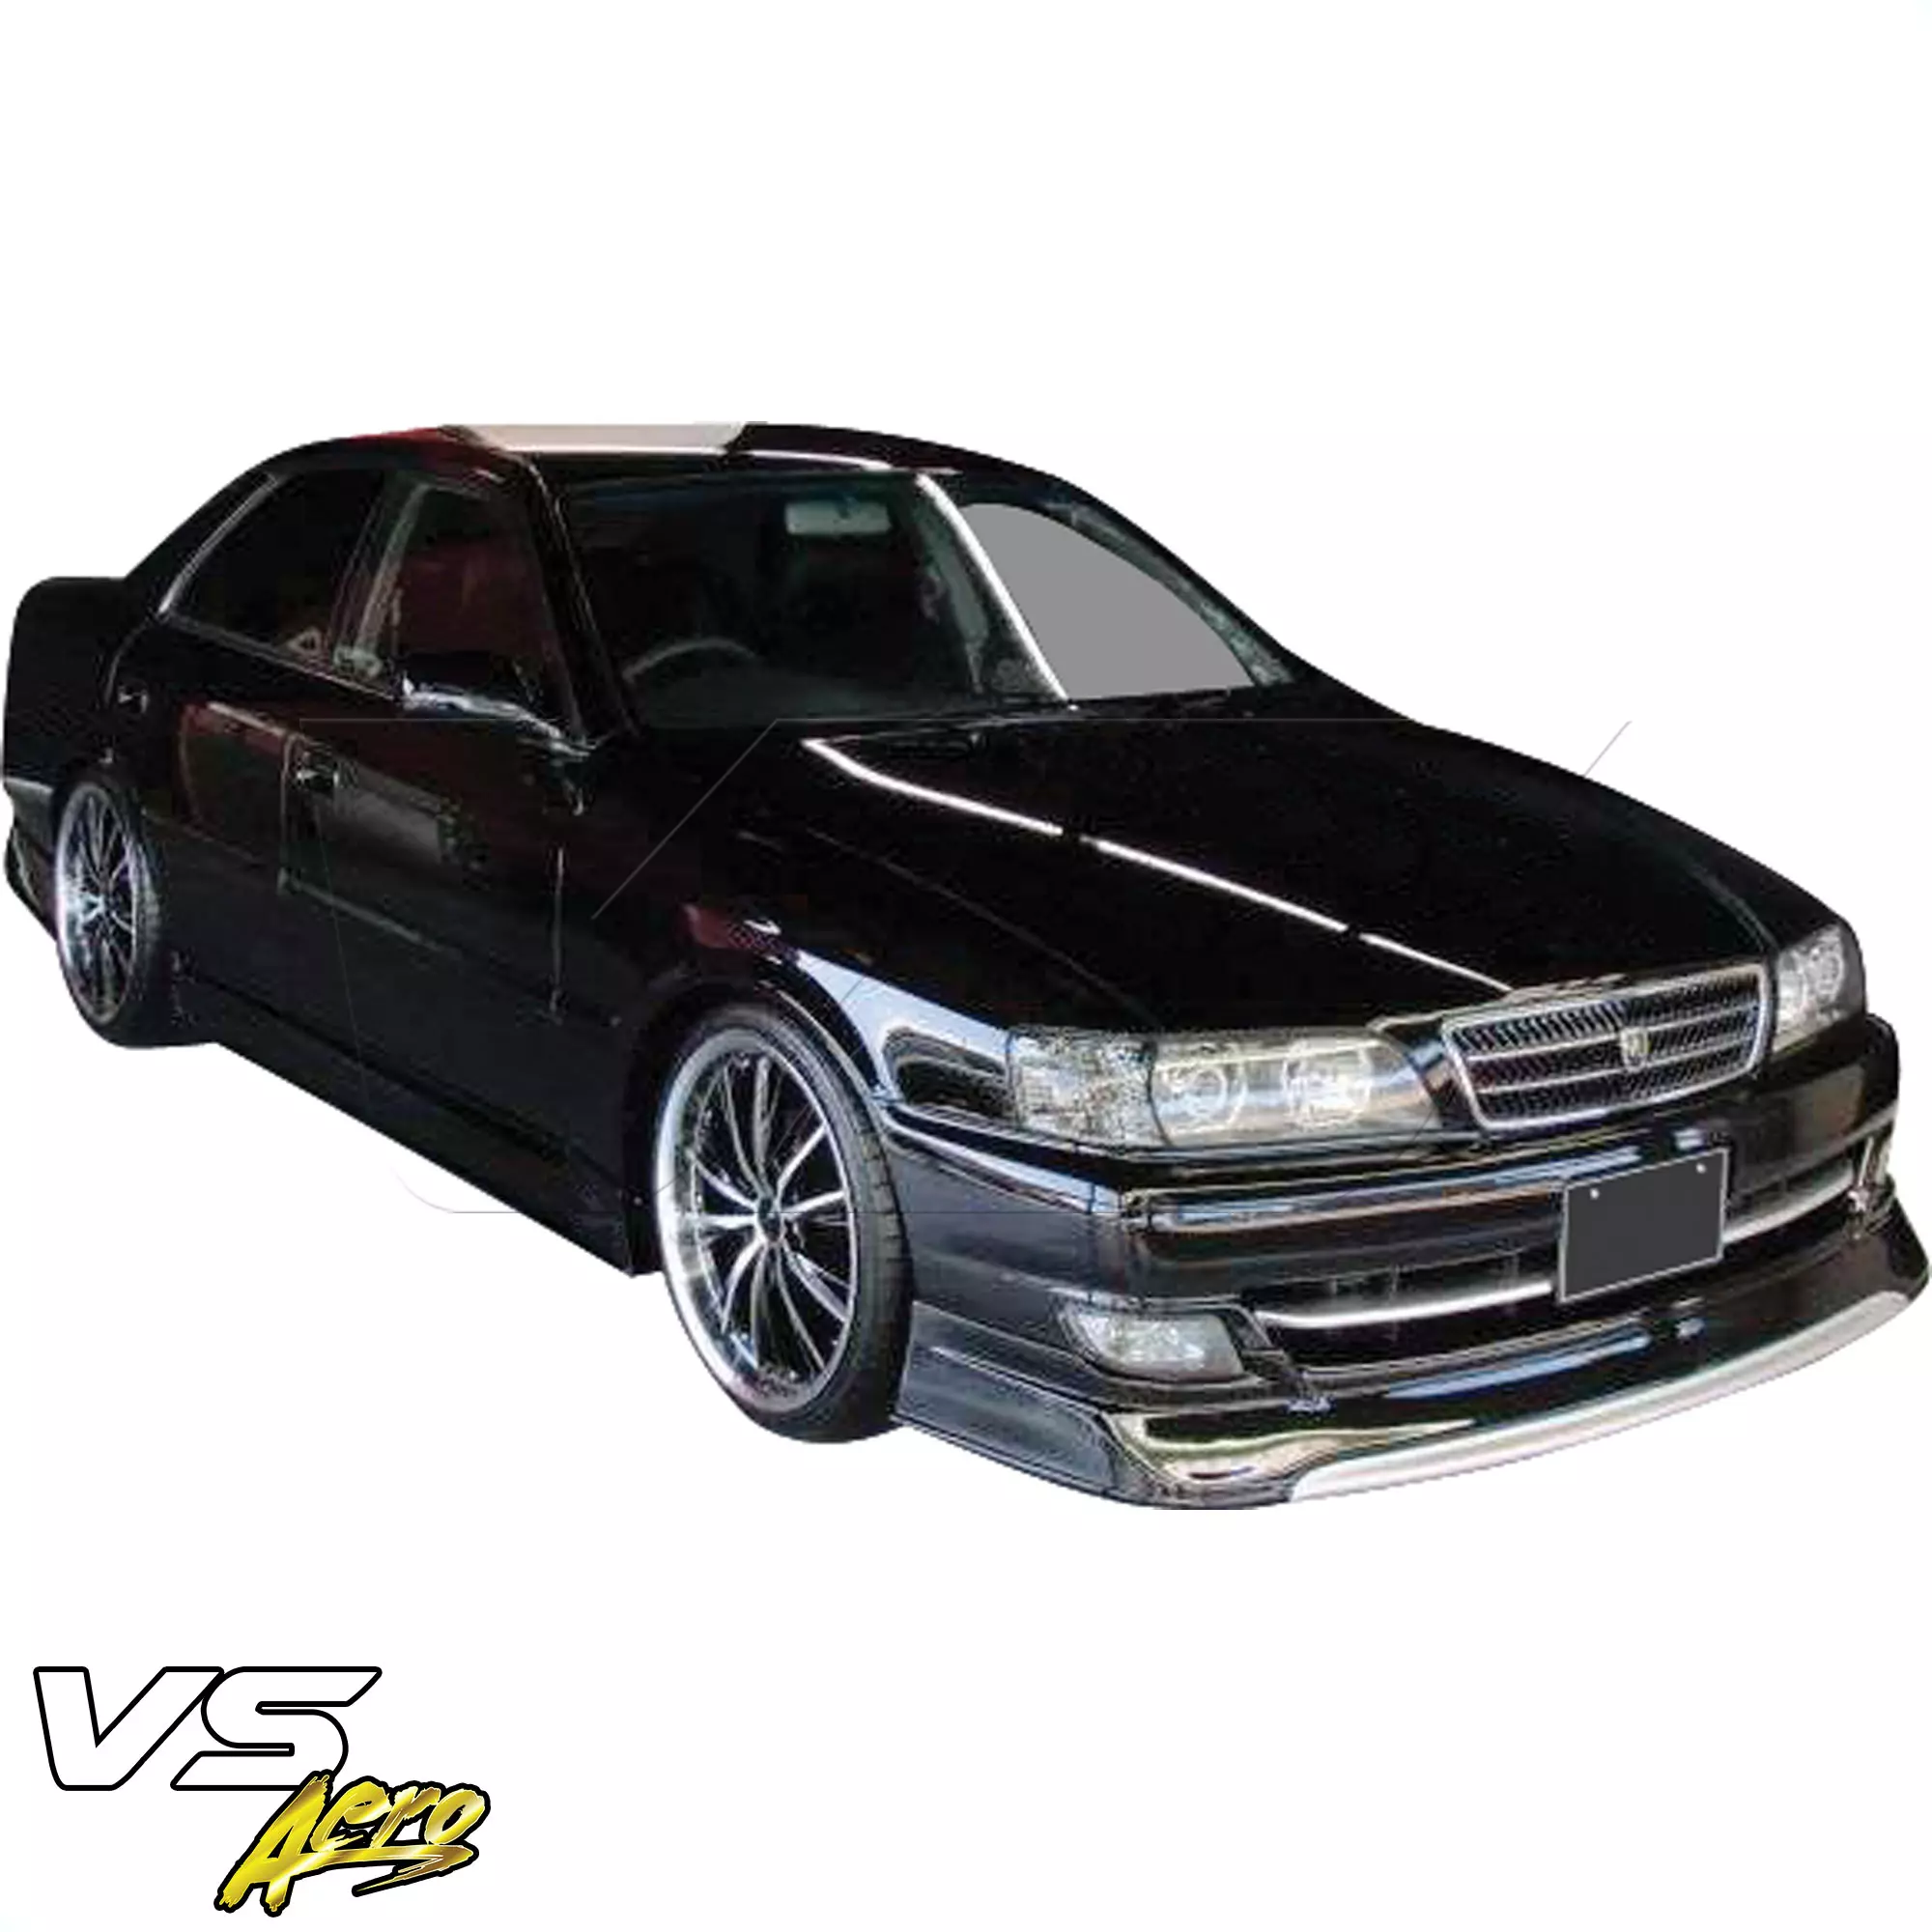 VSaero FRP TRAU Late Front Lip Valance > Toyota Chaser JZX100 1999-2000 - Image 23